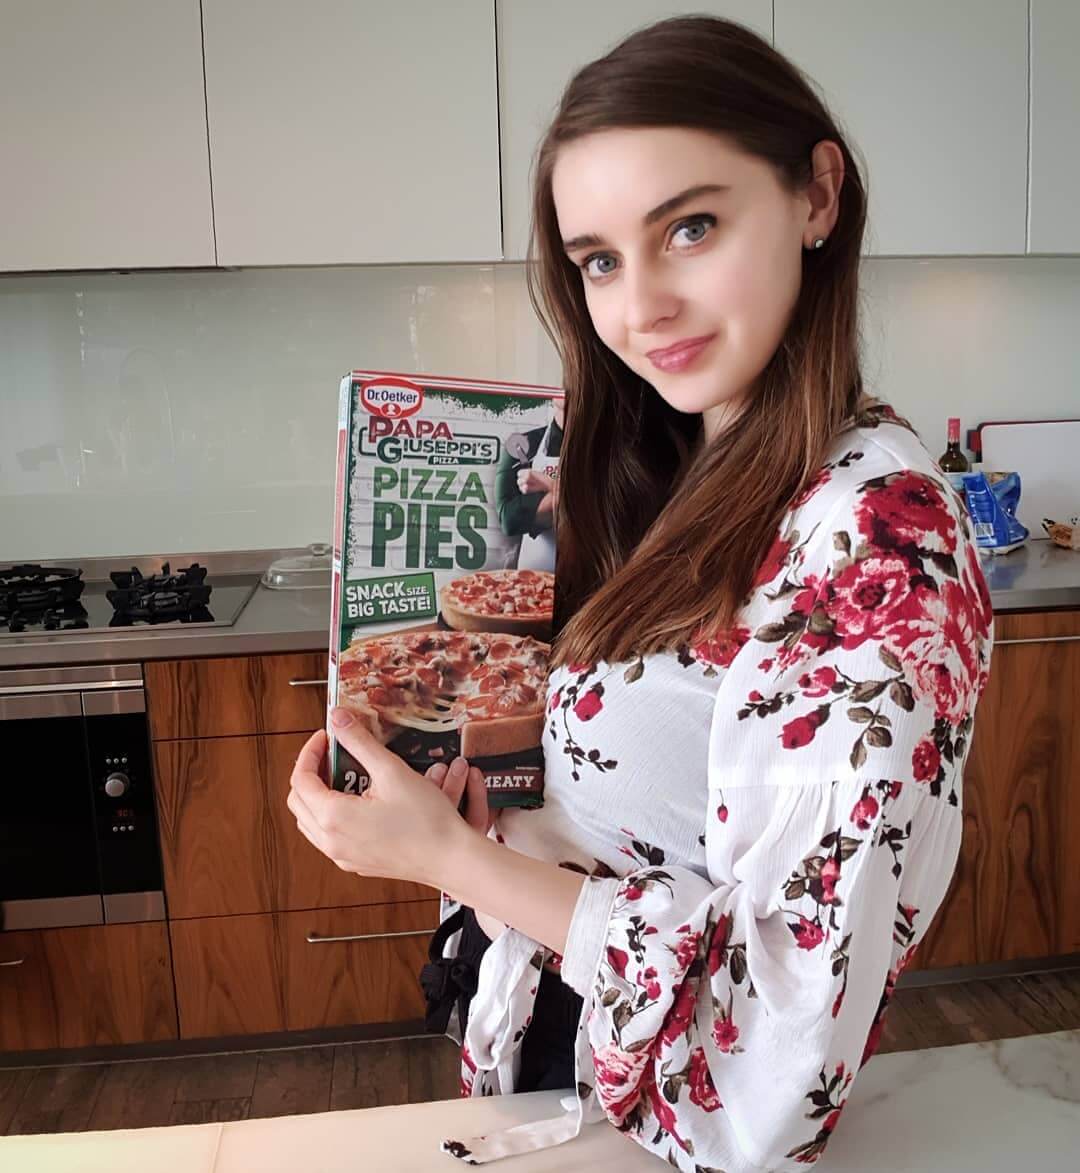 70+ Loserfruit Hot Pictures Are Too Much For You To Handle 20